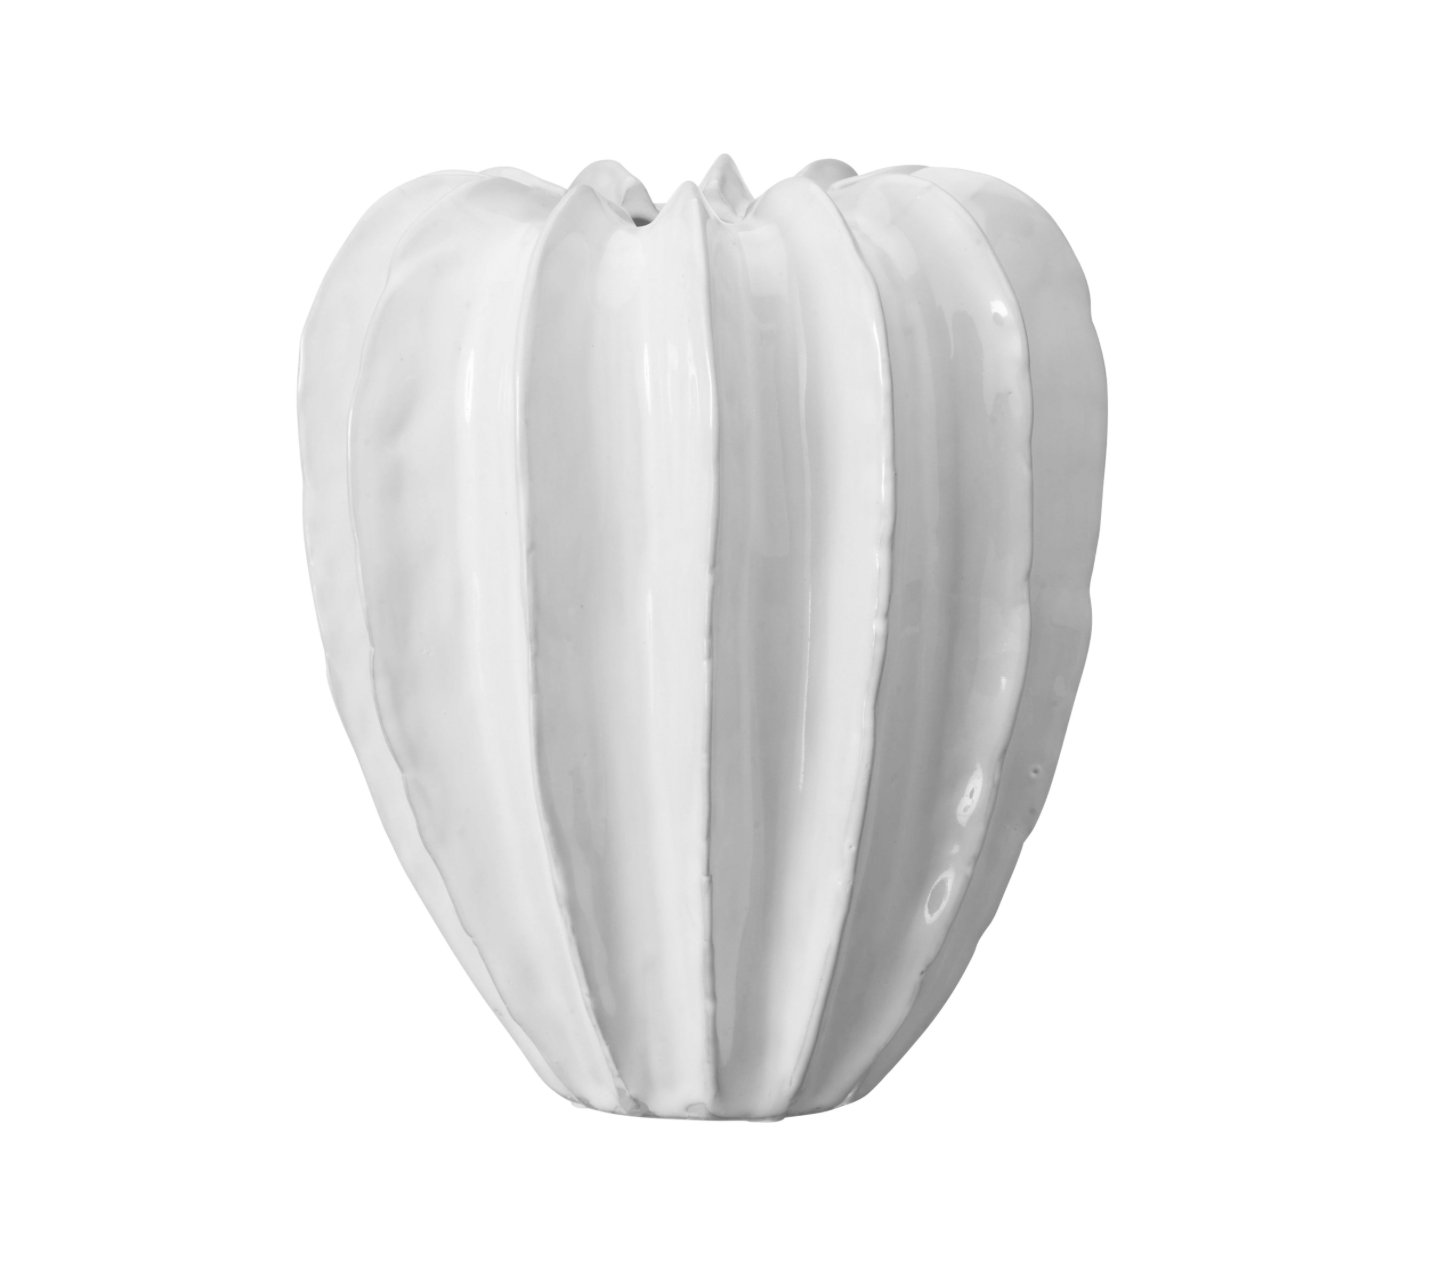 Off White Structured Lined Vase